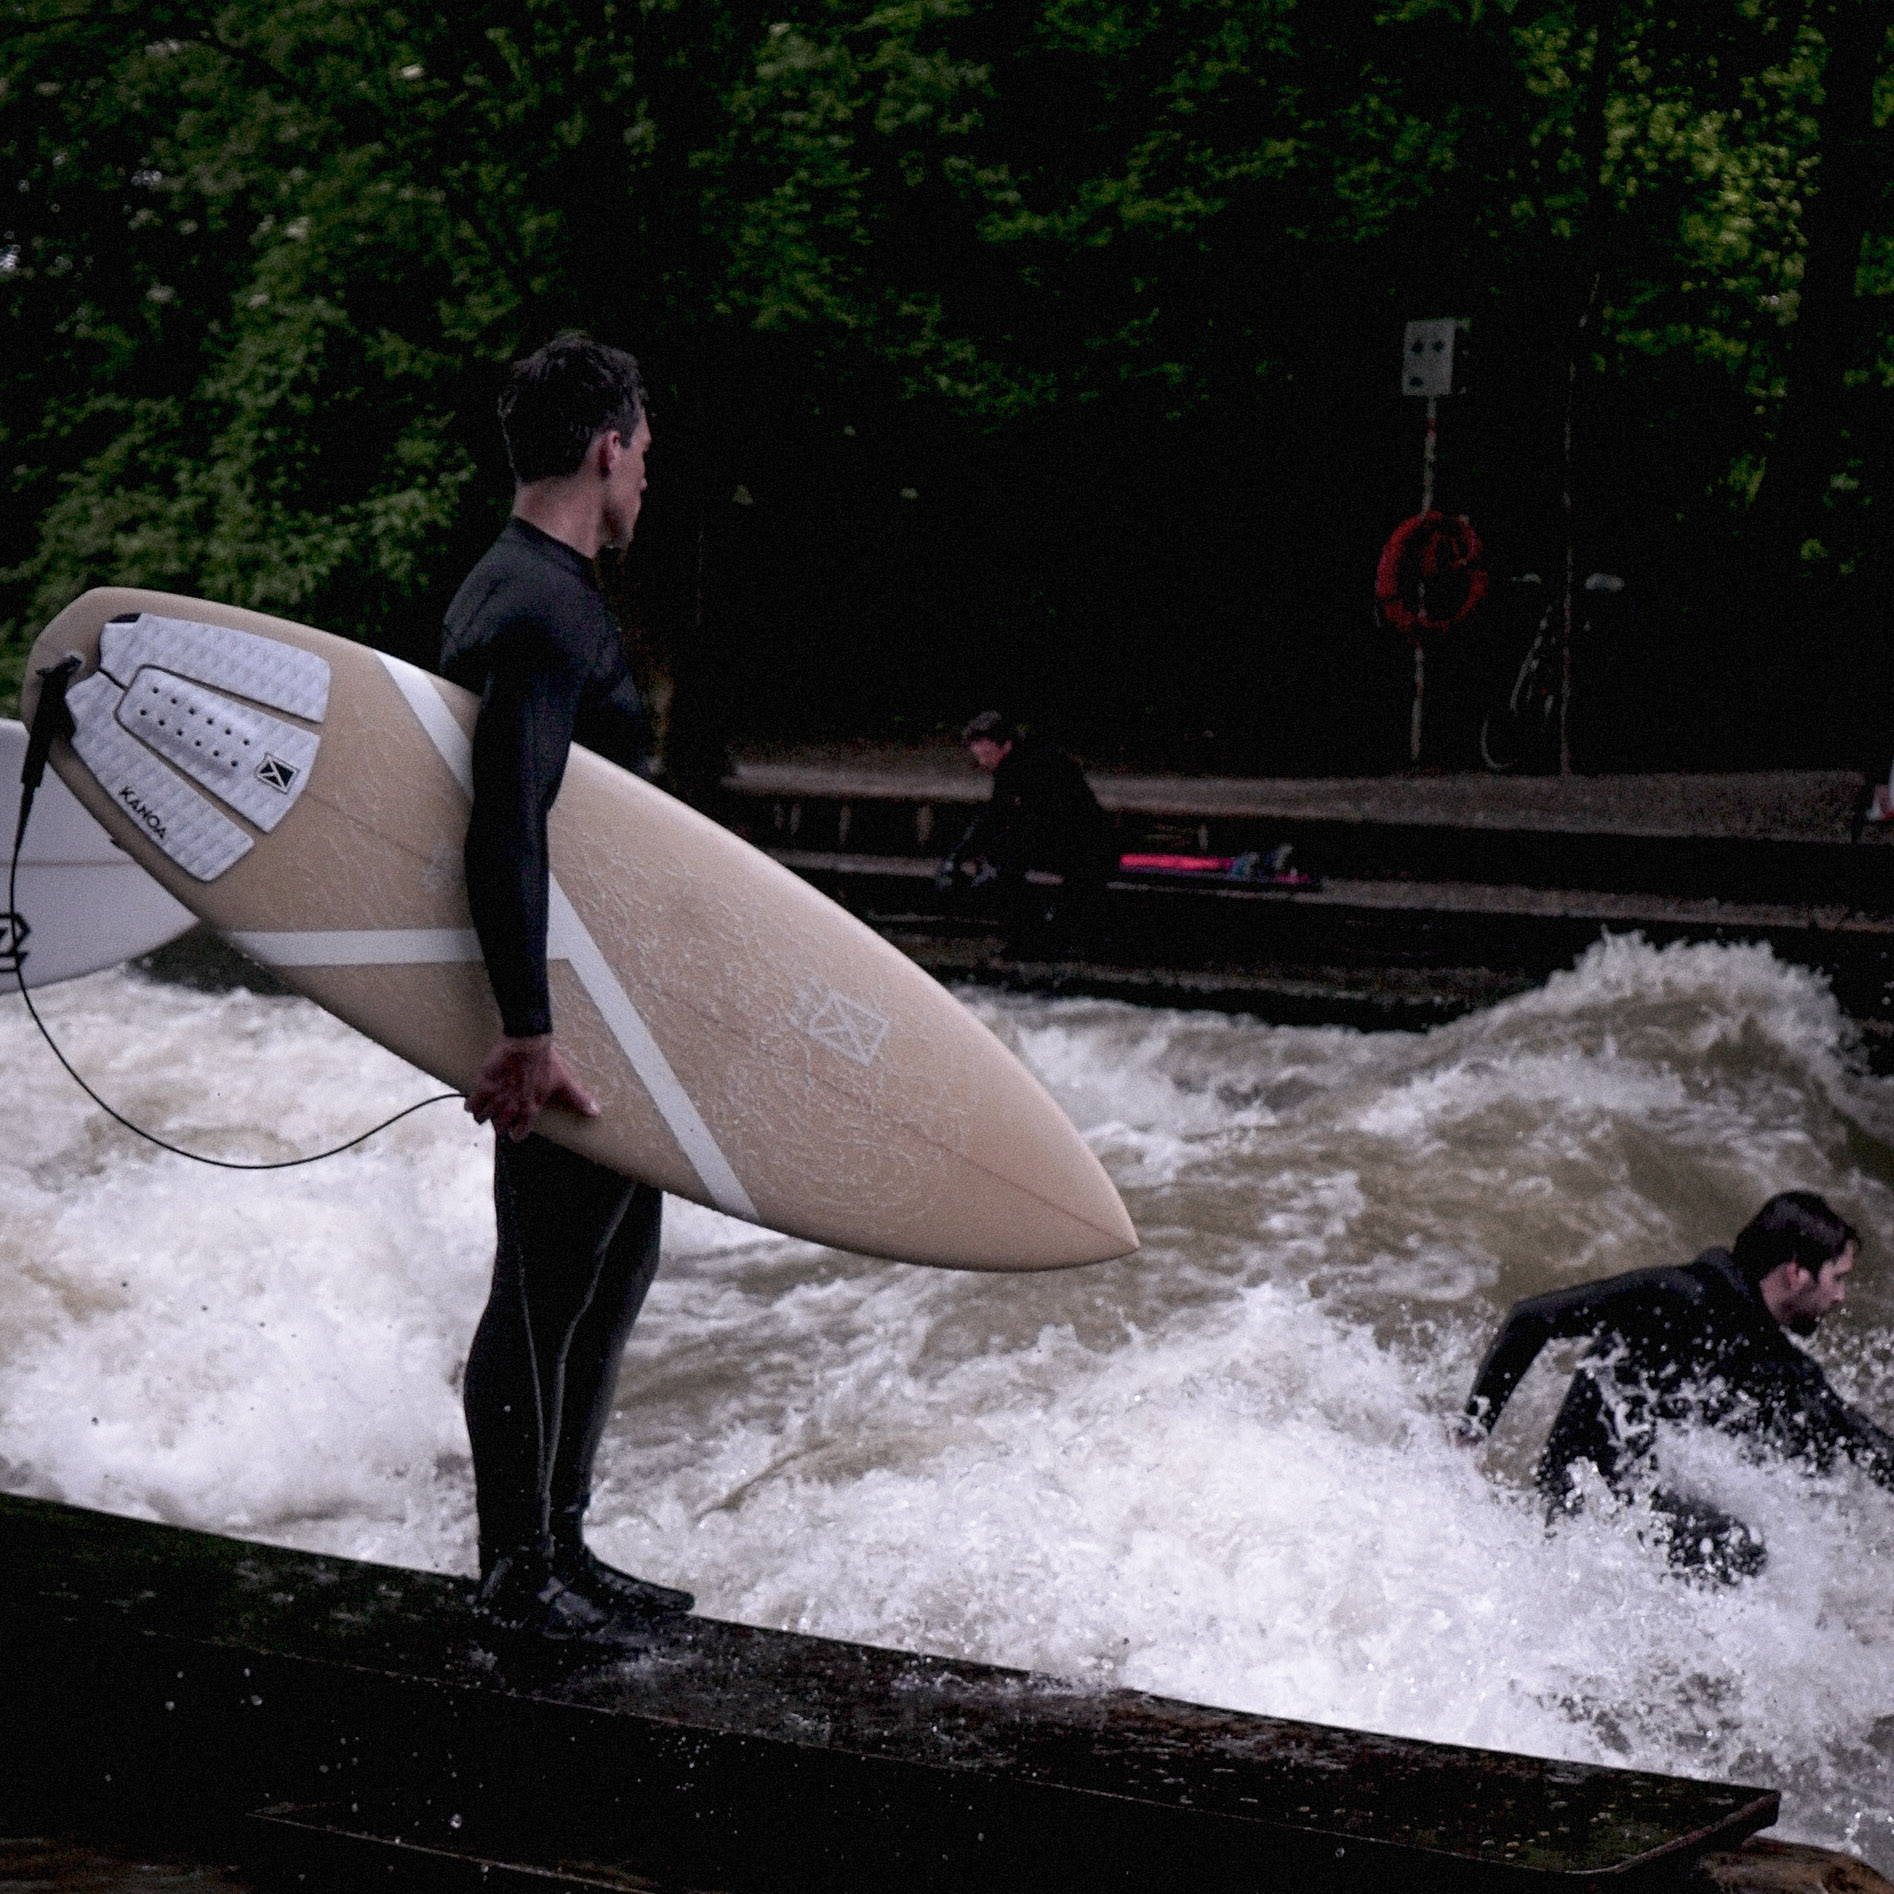 Conquer the rapids: Join the Surfboard Test Tour 2023